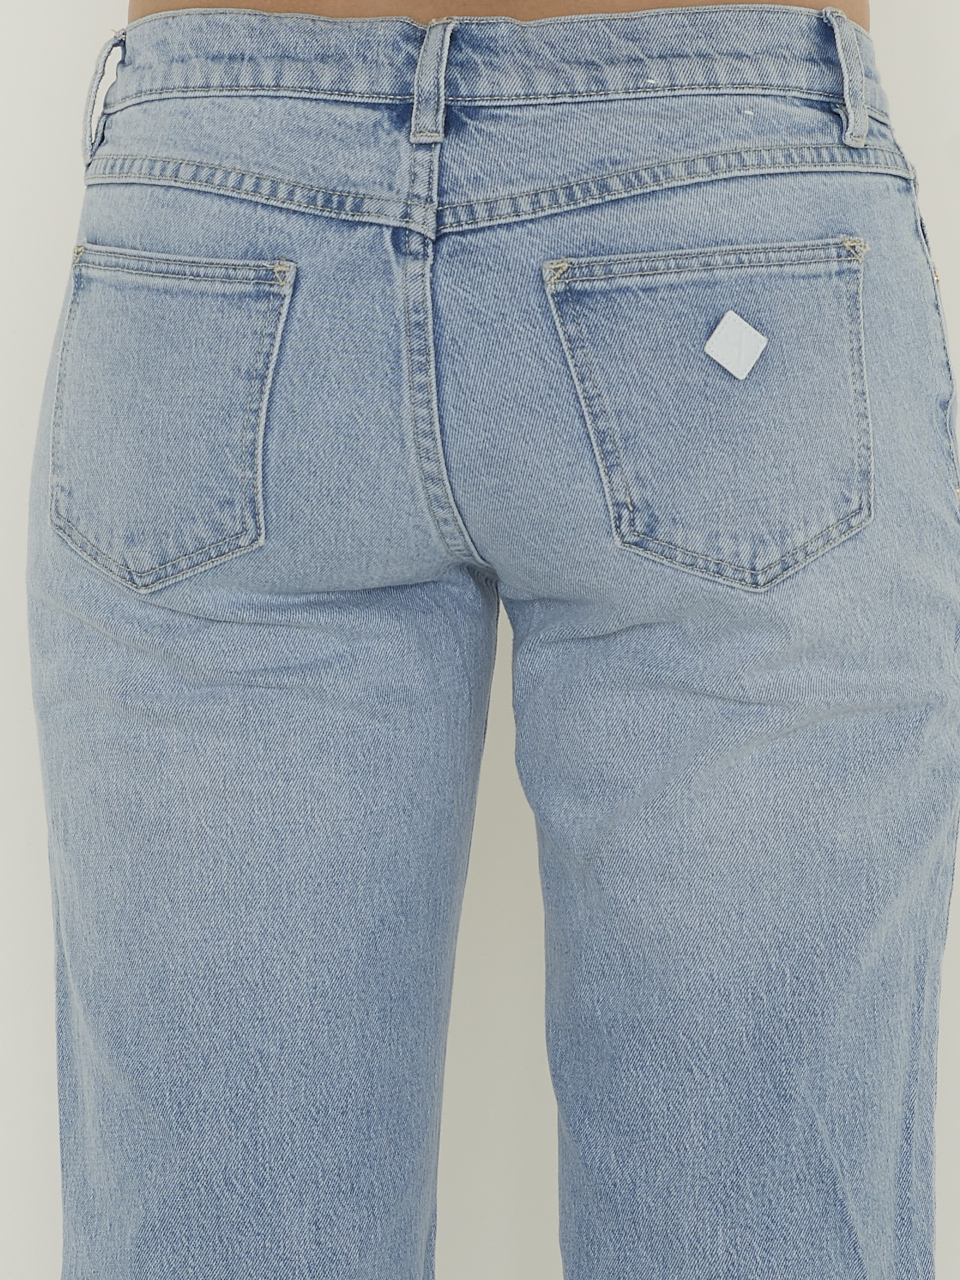 JEANS GINA LOW STRAIGHT